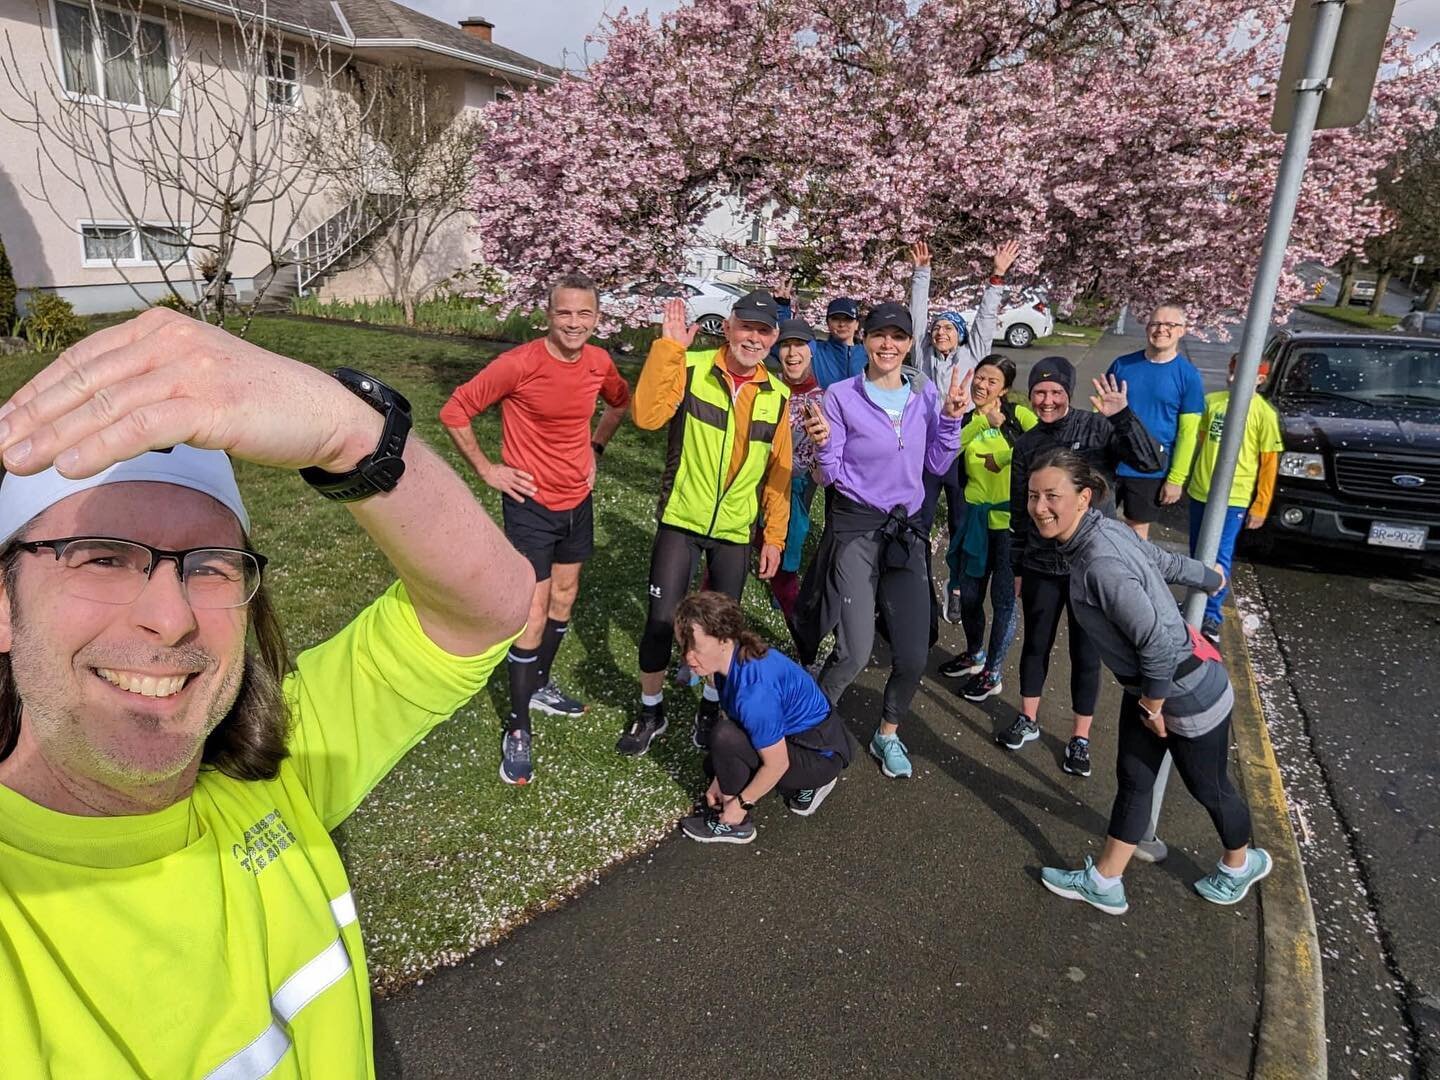 Now this is what we call Spring Weather ! Suns out, guns out. 

Our RunSPORT clinics are in their final hard week of training prior to our taper period leading into the race. 

Everyone is working hard and staying focused ahead of our big event on Su